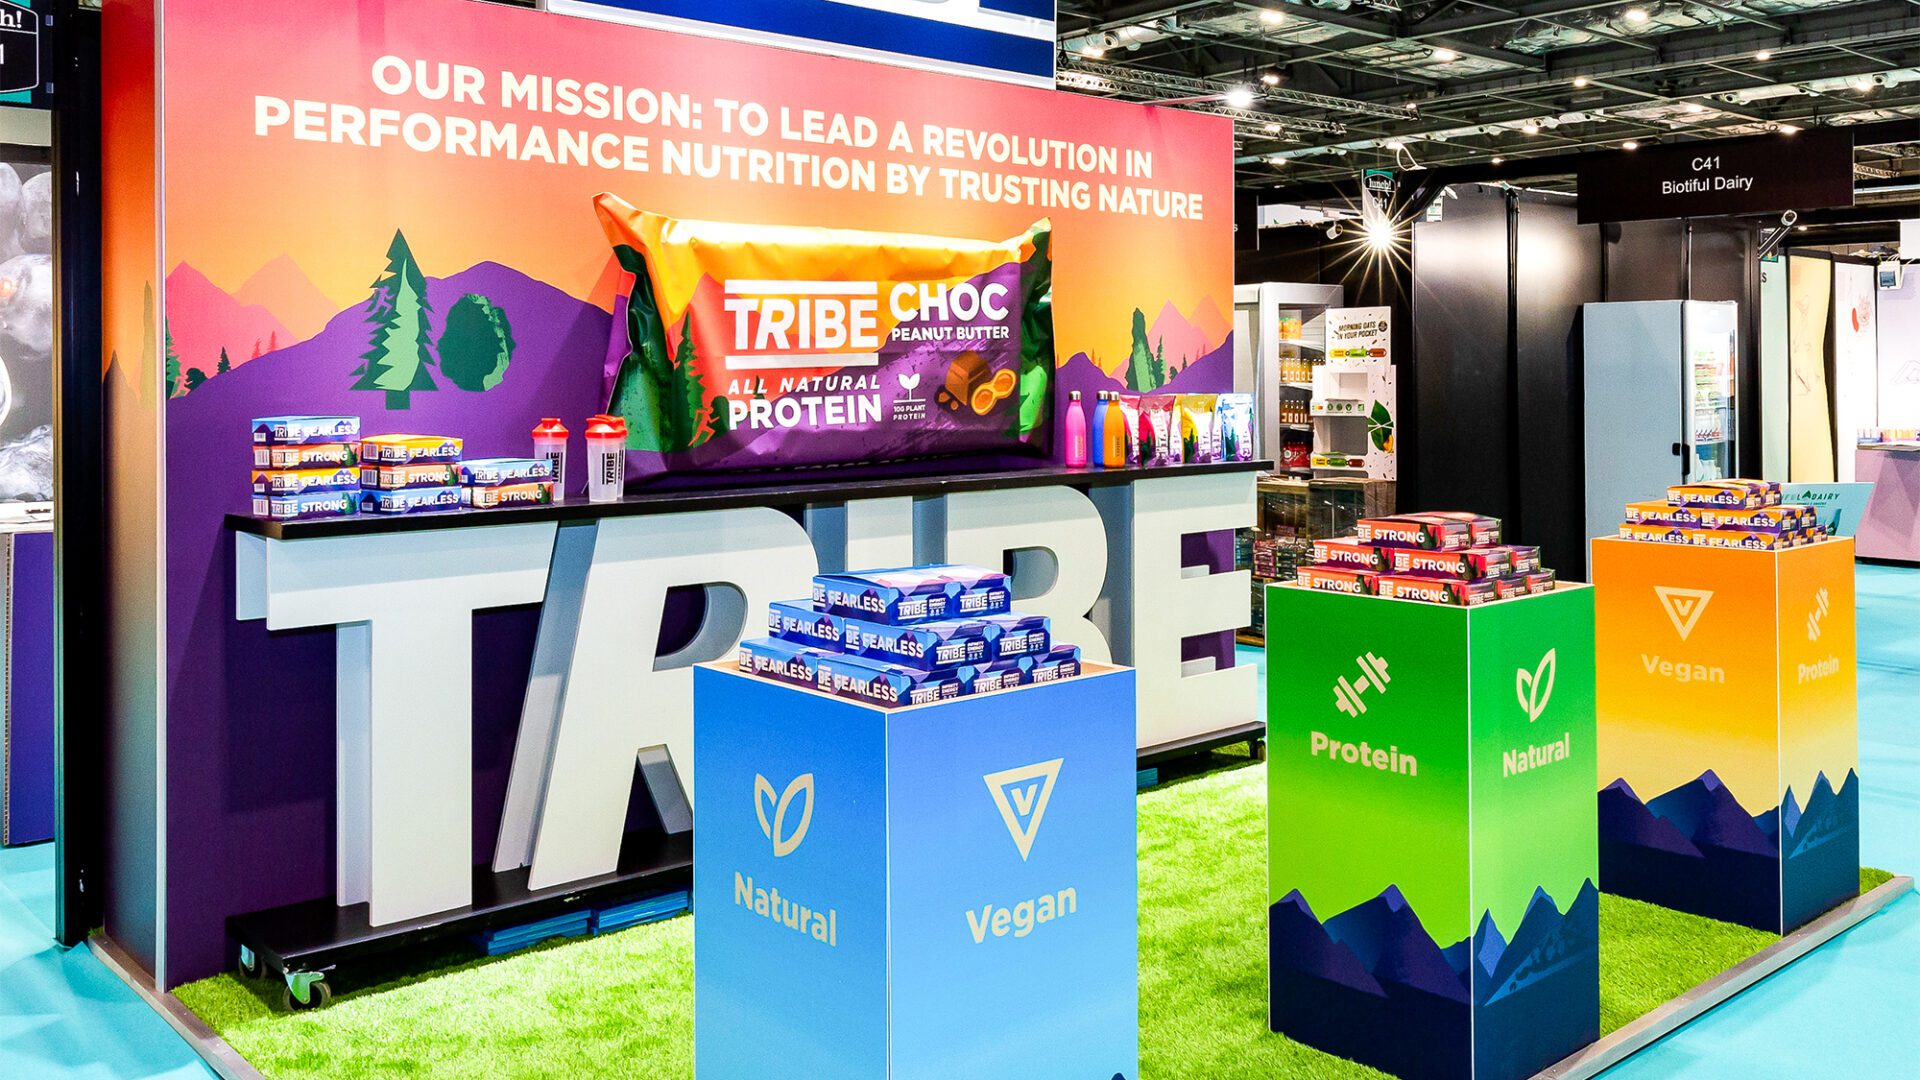 Exhibition stand for Tribe at Lunch trade show